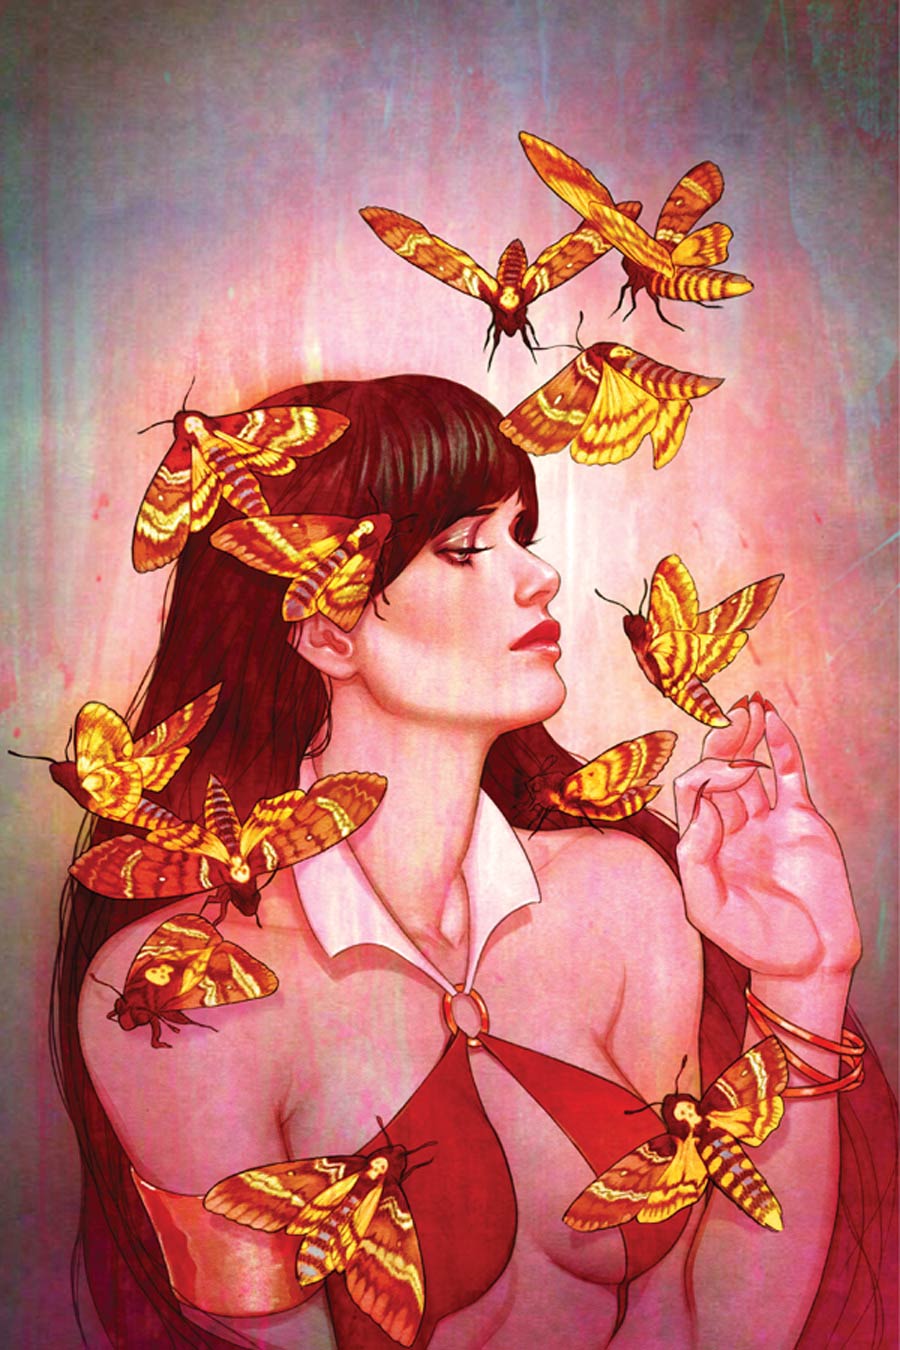 Vampirella Vol 5 #5 Cover E High-End Jenny Frison Virgin Art Ultra-Limited Variant Cover (ONLY 50 COPIES IN EXISTENCE!)